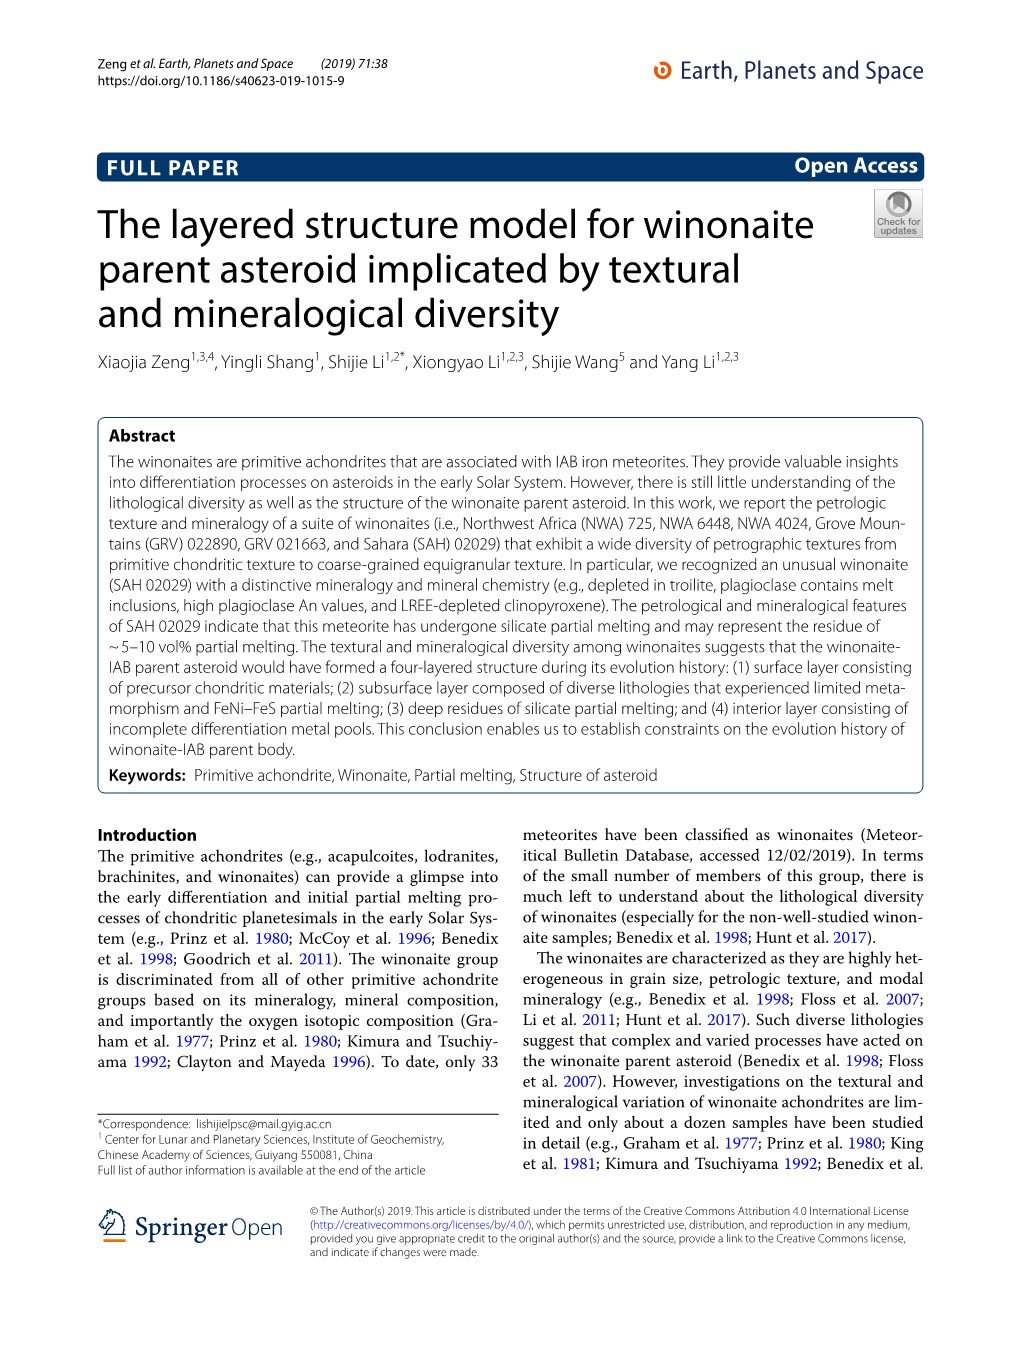 The Layered Structure Model for Winonaite Parent Asteroid